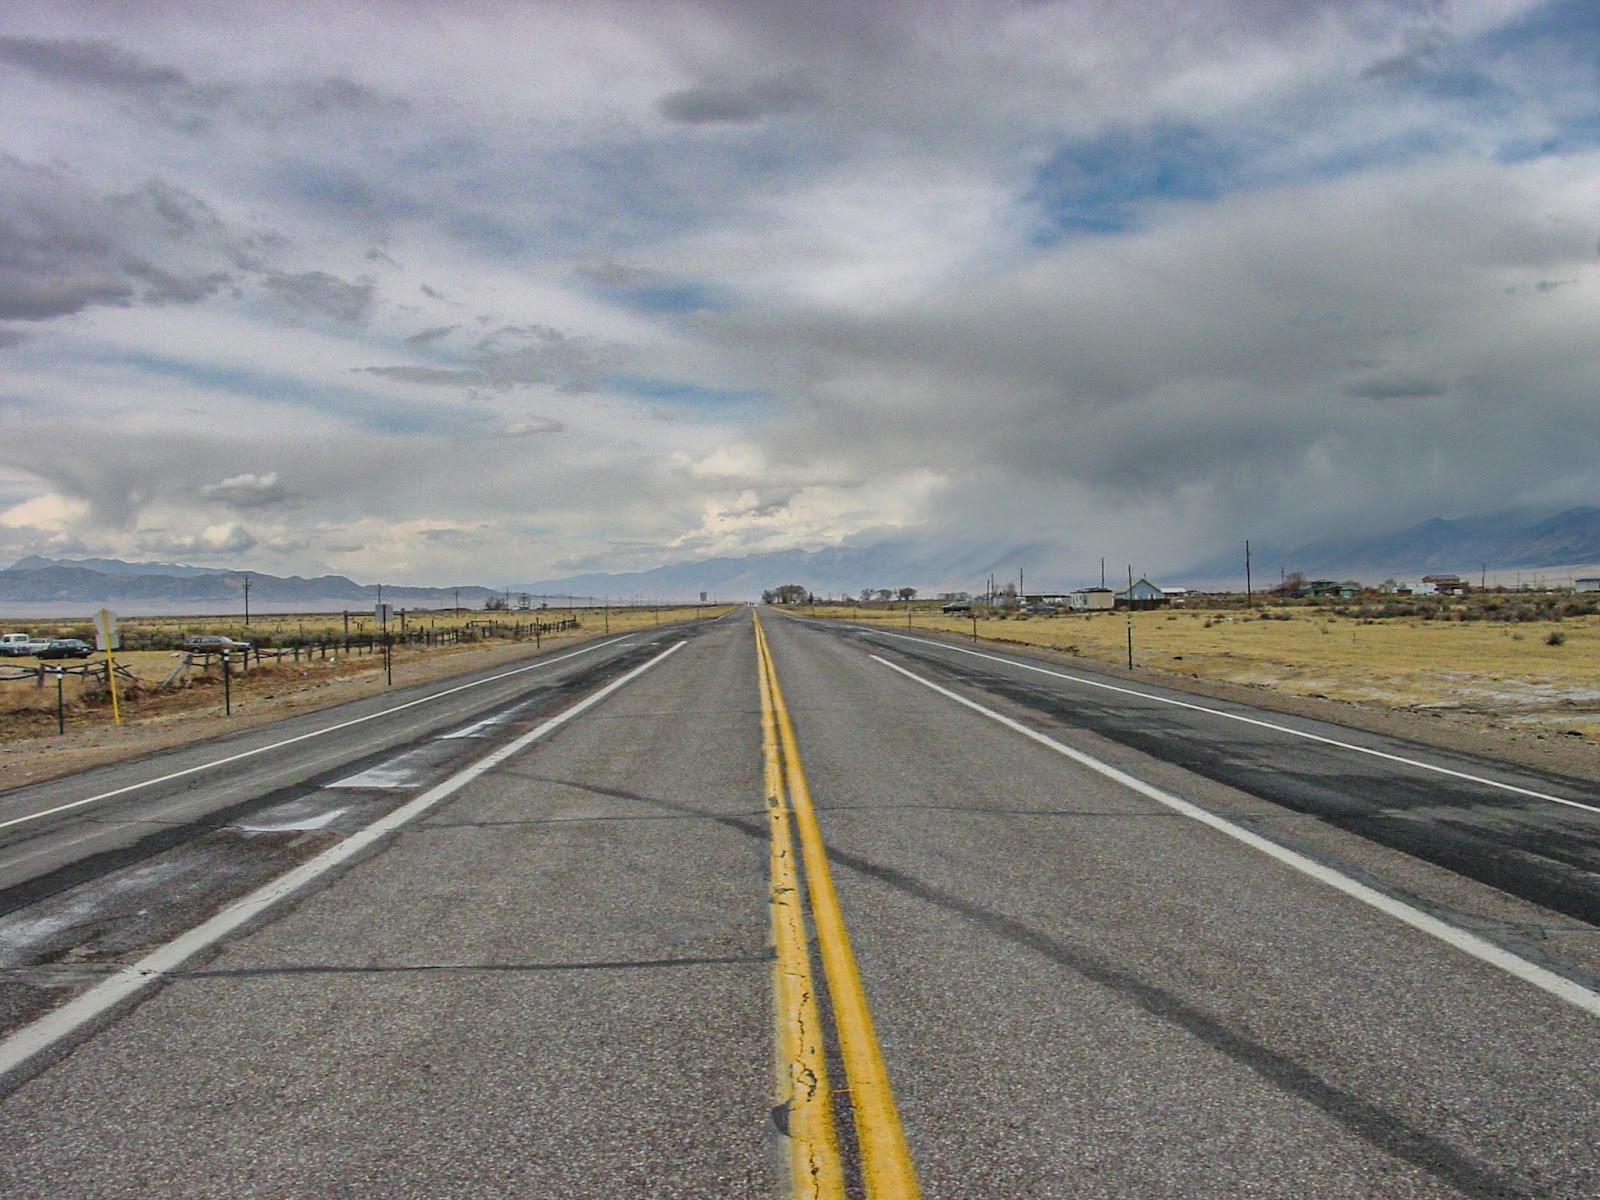 The centerline of a highway stretches into the distant dark clouds.